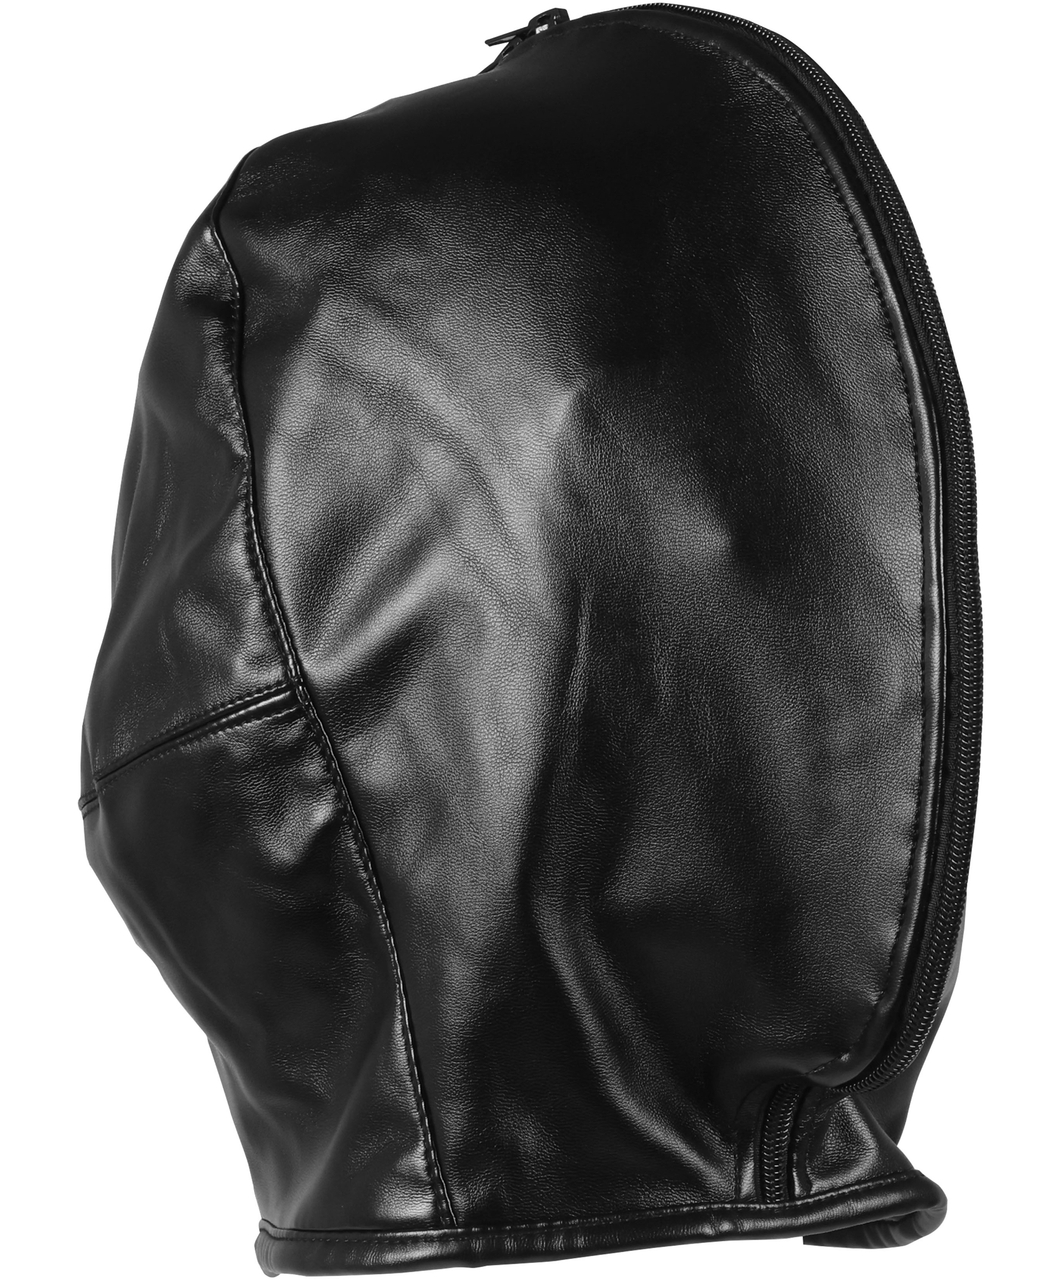 Ouch! black double hood mask with zipper & lacing